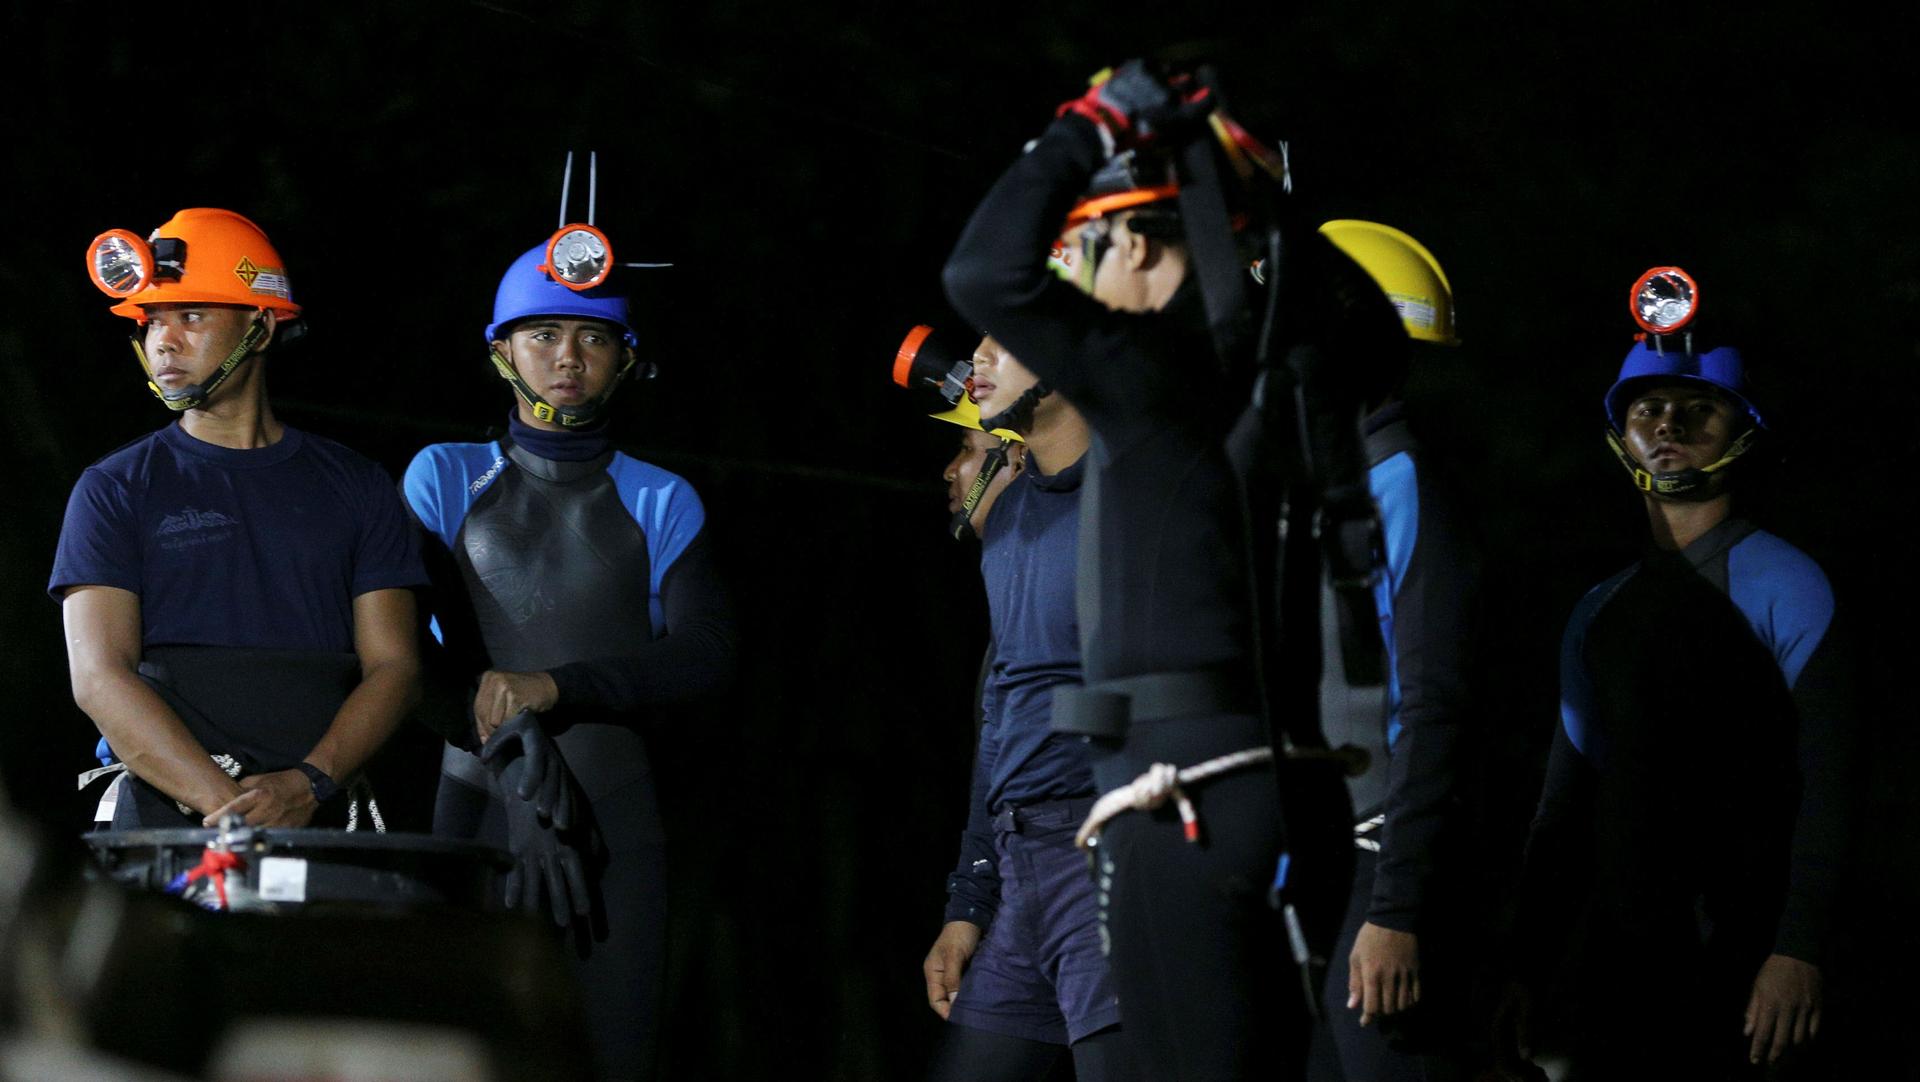 Thai divers gather before they enter to the Tham Luang cave, where 12 boys and their soccer coach are trapped, in the northern province of Chiang Rai, Thailand, July 6, 2018.